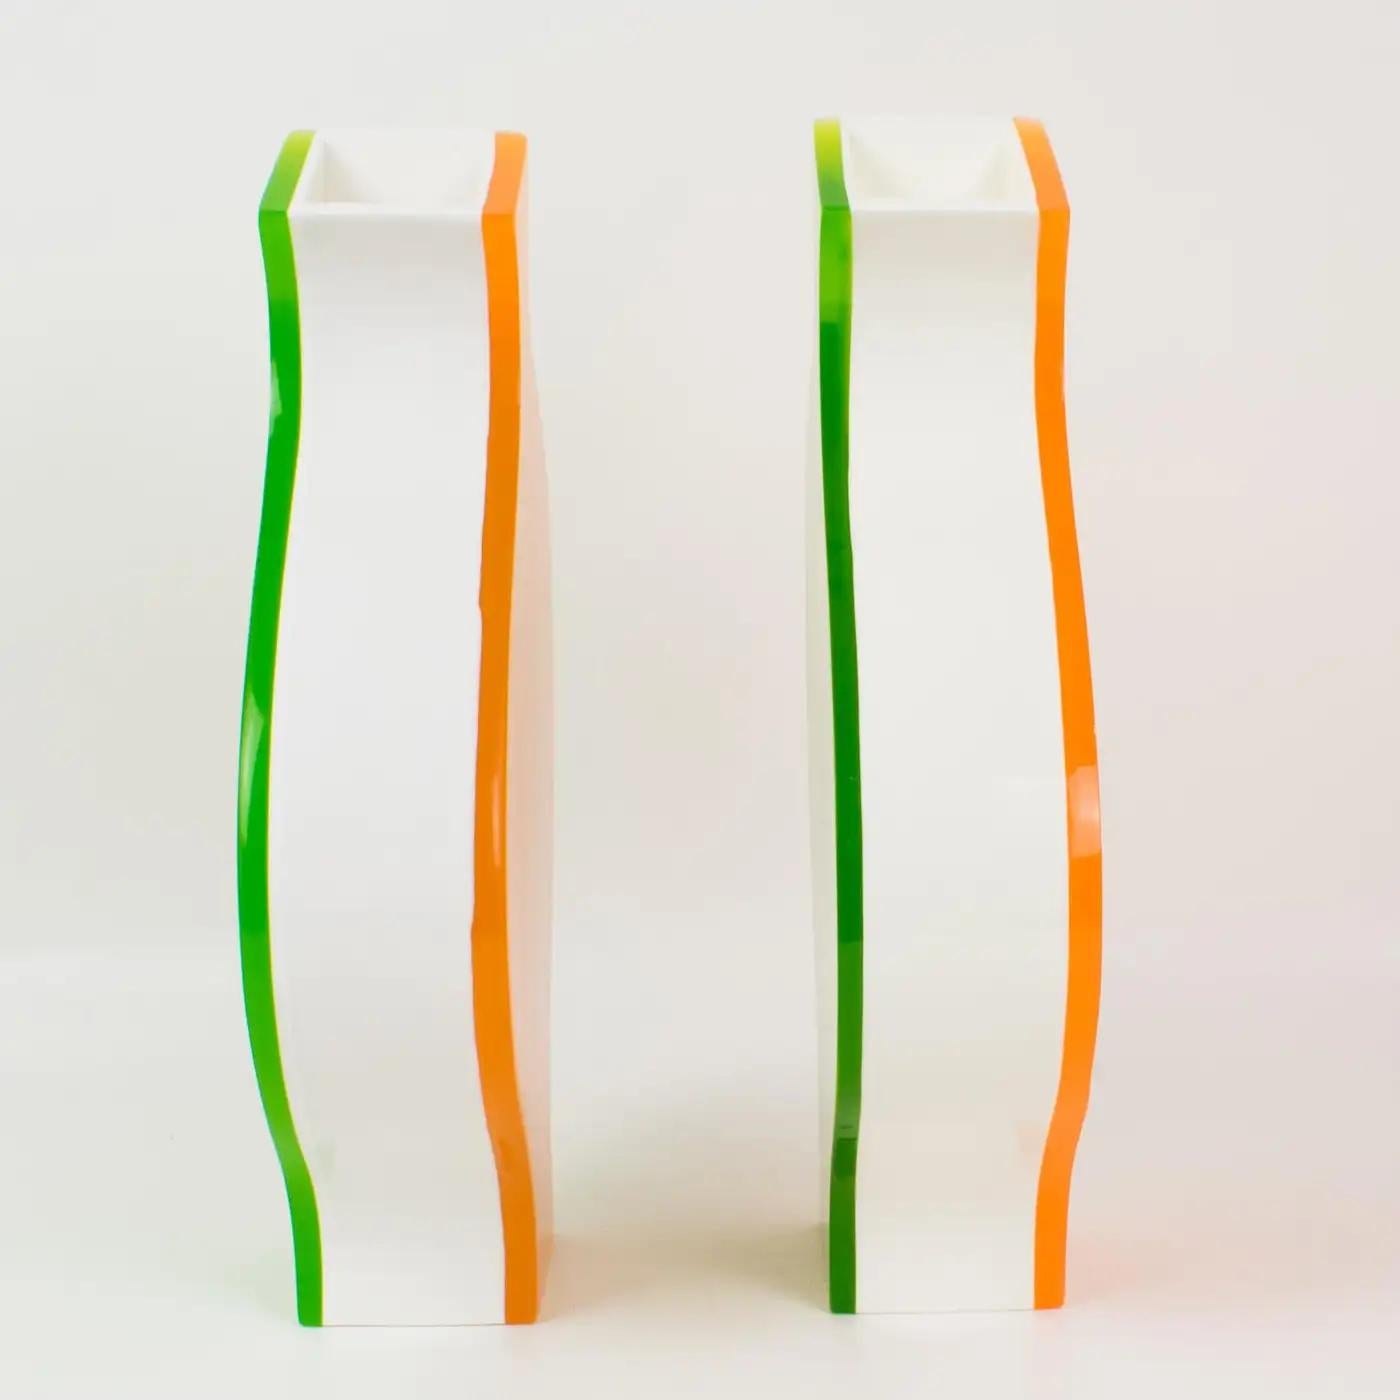 Late 20th Century Villeroy & Boch Orange and Green Lucite Vases, 1990s For Sale